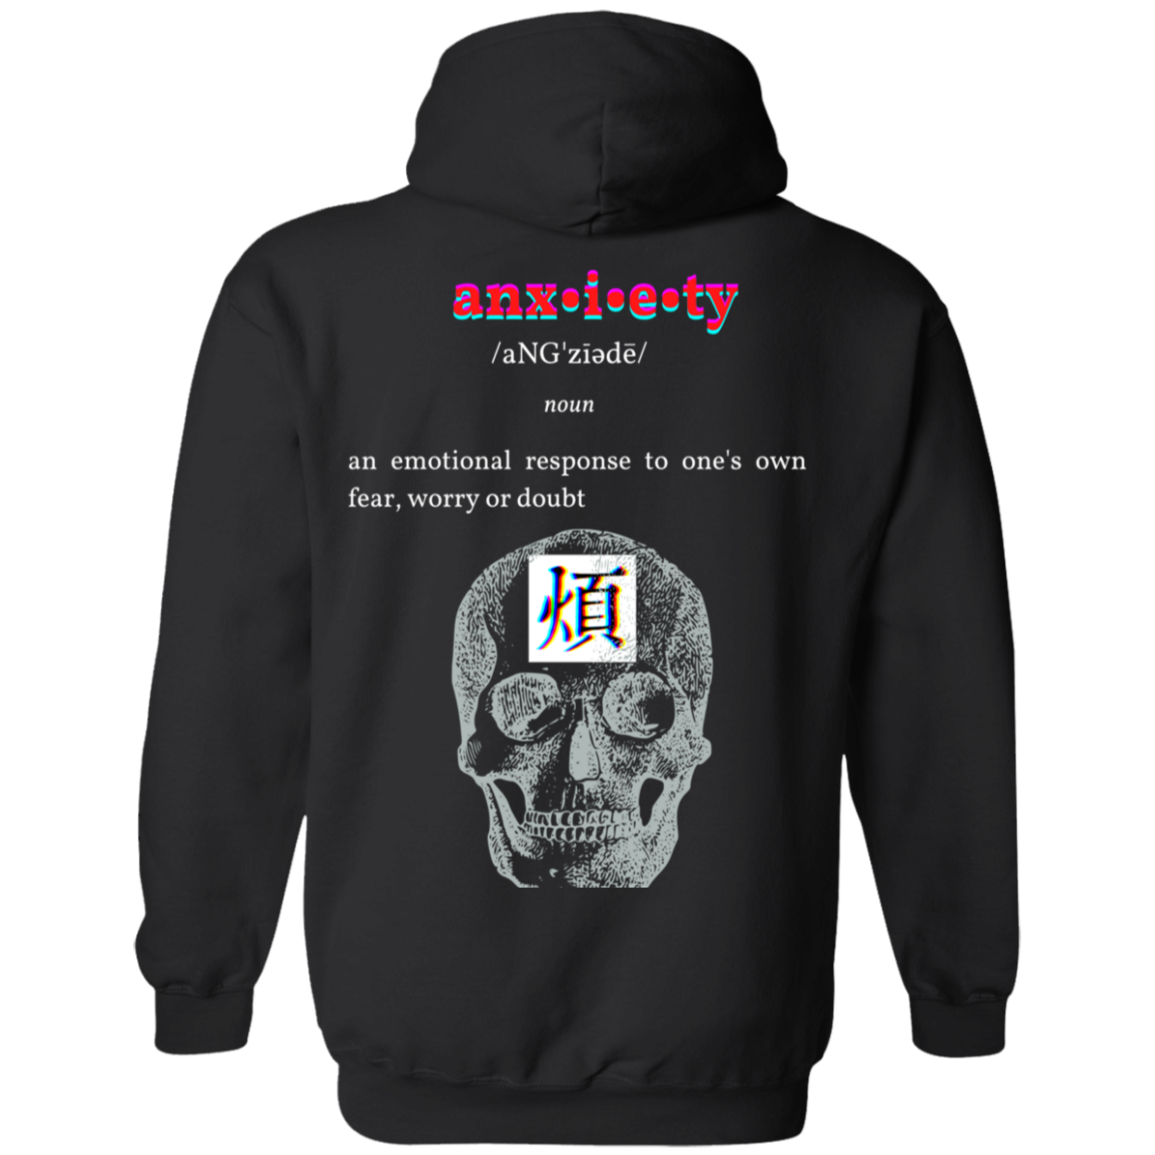 (back) from top to bottom it reads: anx•i•e•ty /aNG'ziadè/ noun an emotional response to one's own fear, worry or doubt. below the text, there's a skull with the kanji for anxiety in japanese in the center of it.